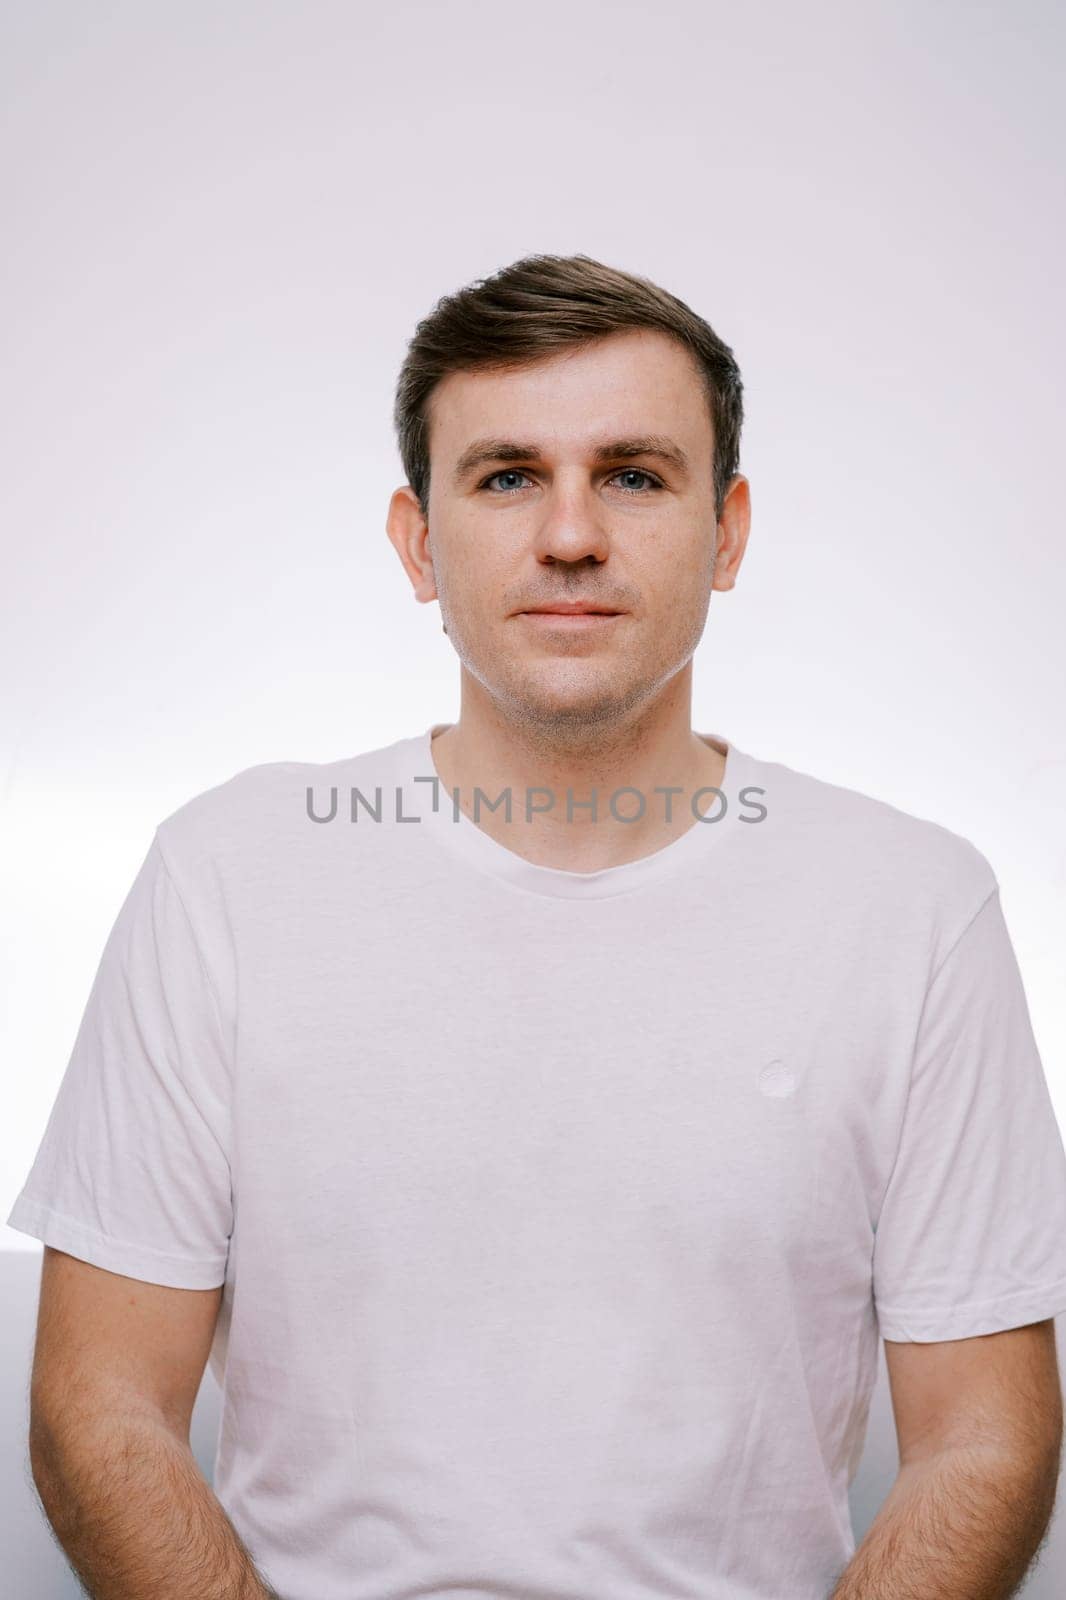 Young serious man in a white T-shirt on a gray background. Portrait by Nadtochiy